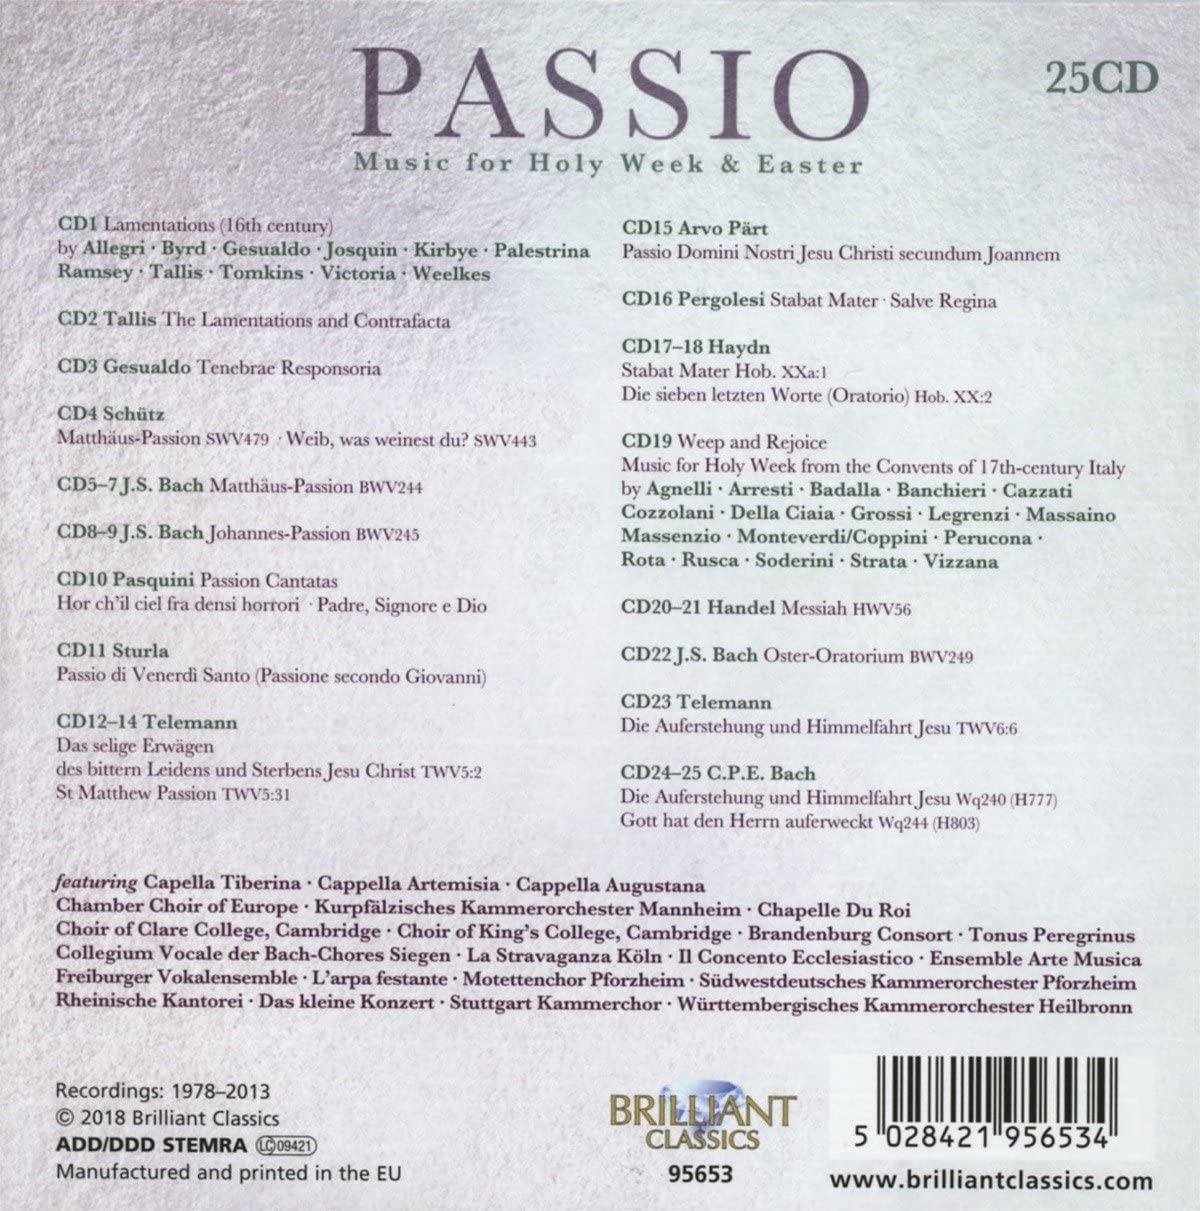 Passio: Music for Holy Week & Easter - slide-1